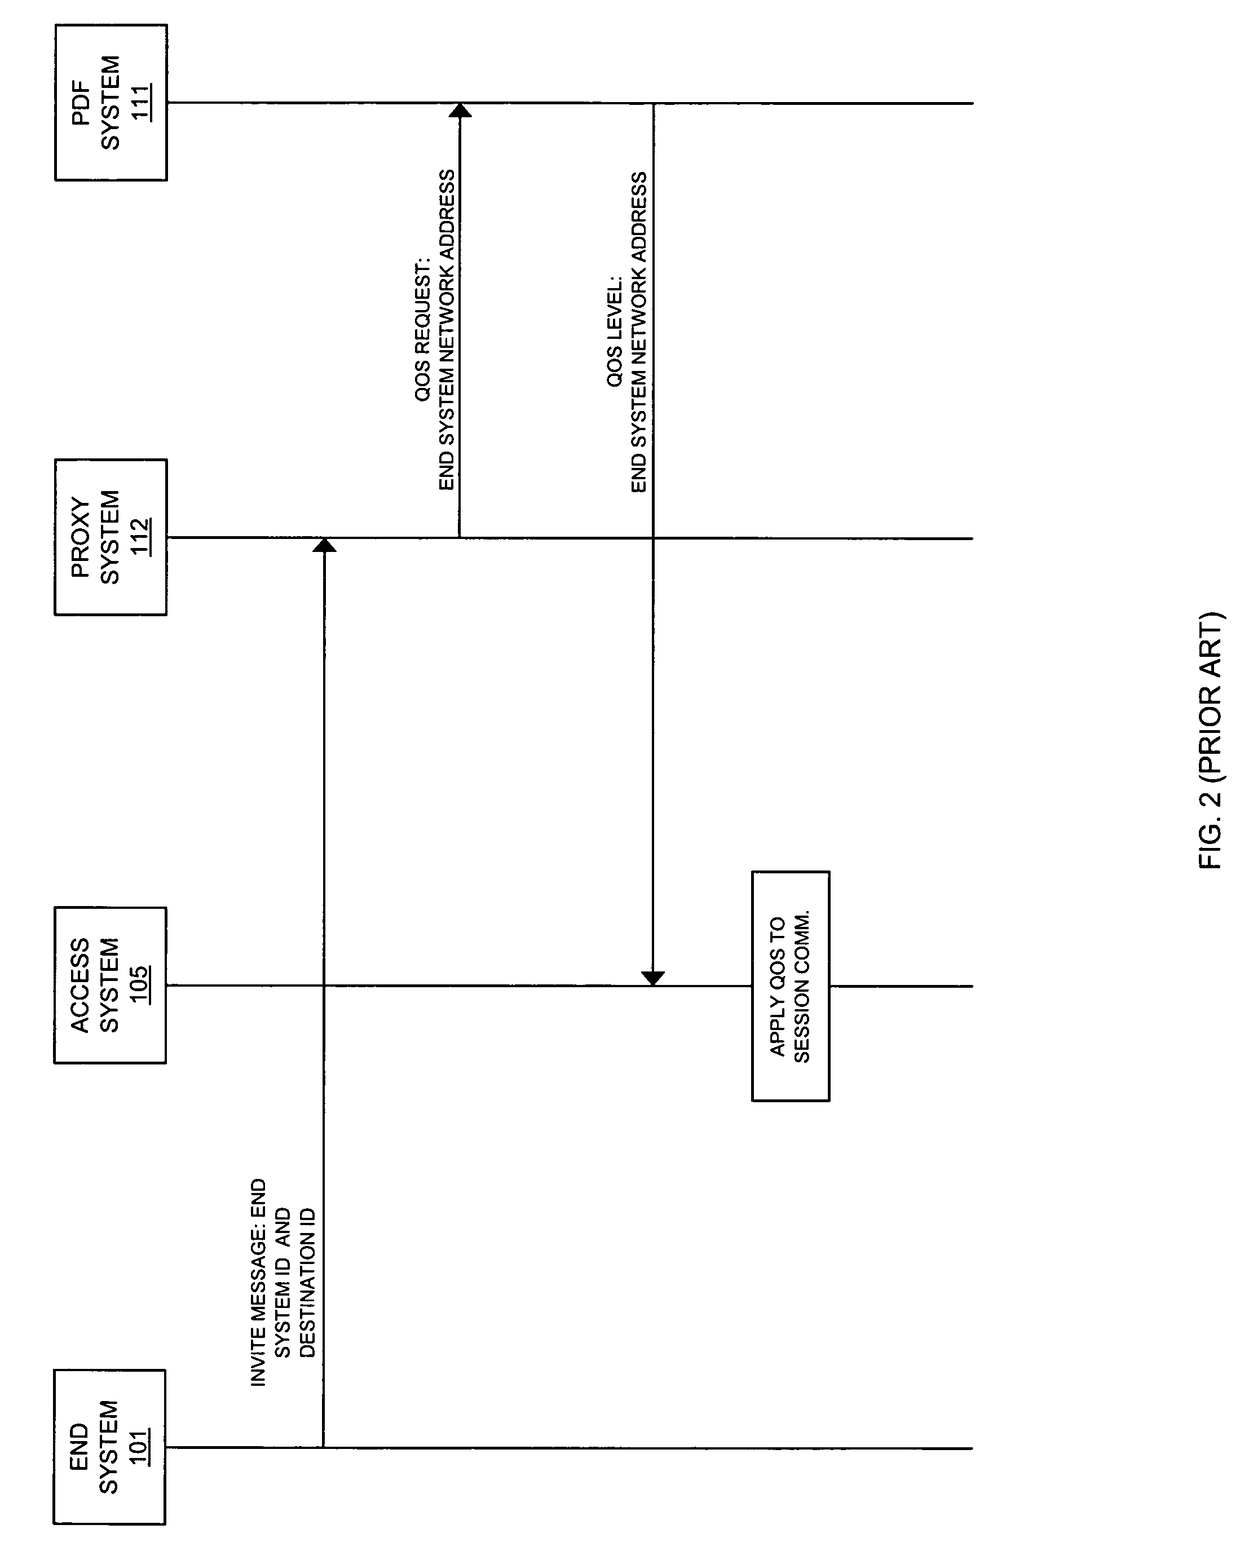 Quality of service provisioning for packet service sessions in communication networks